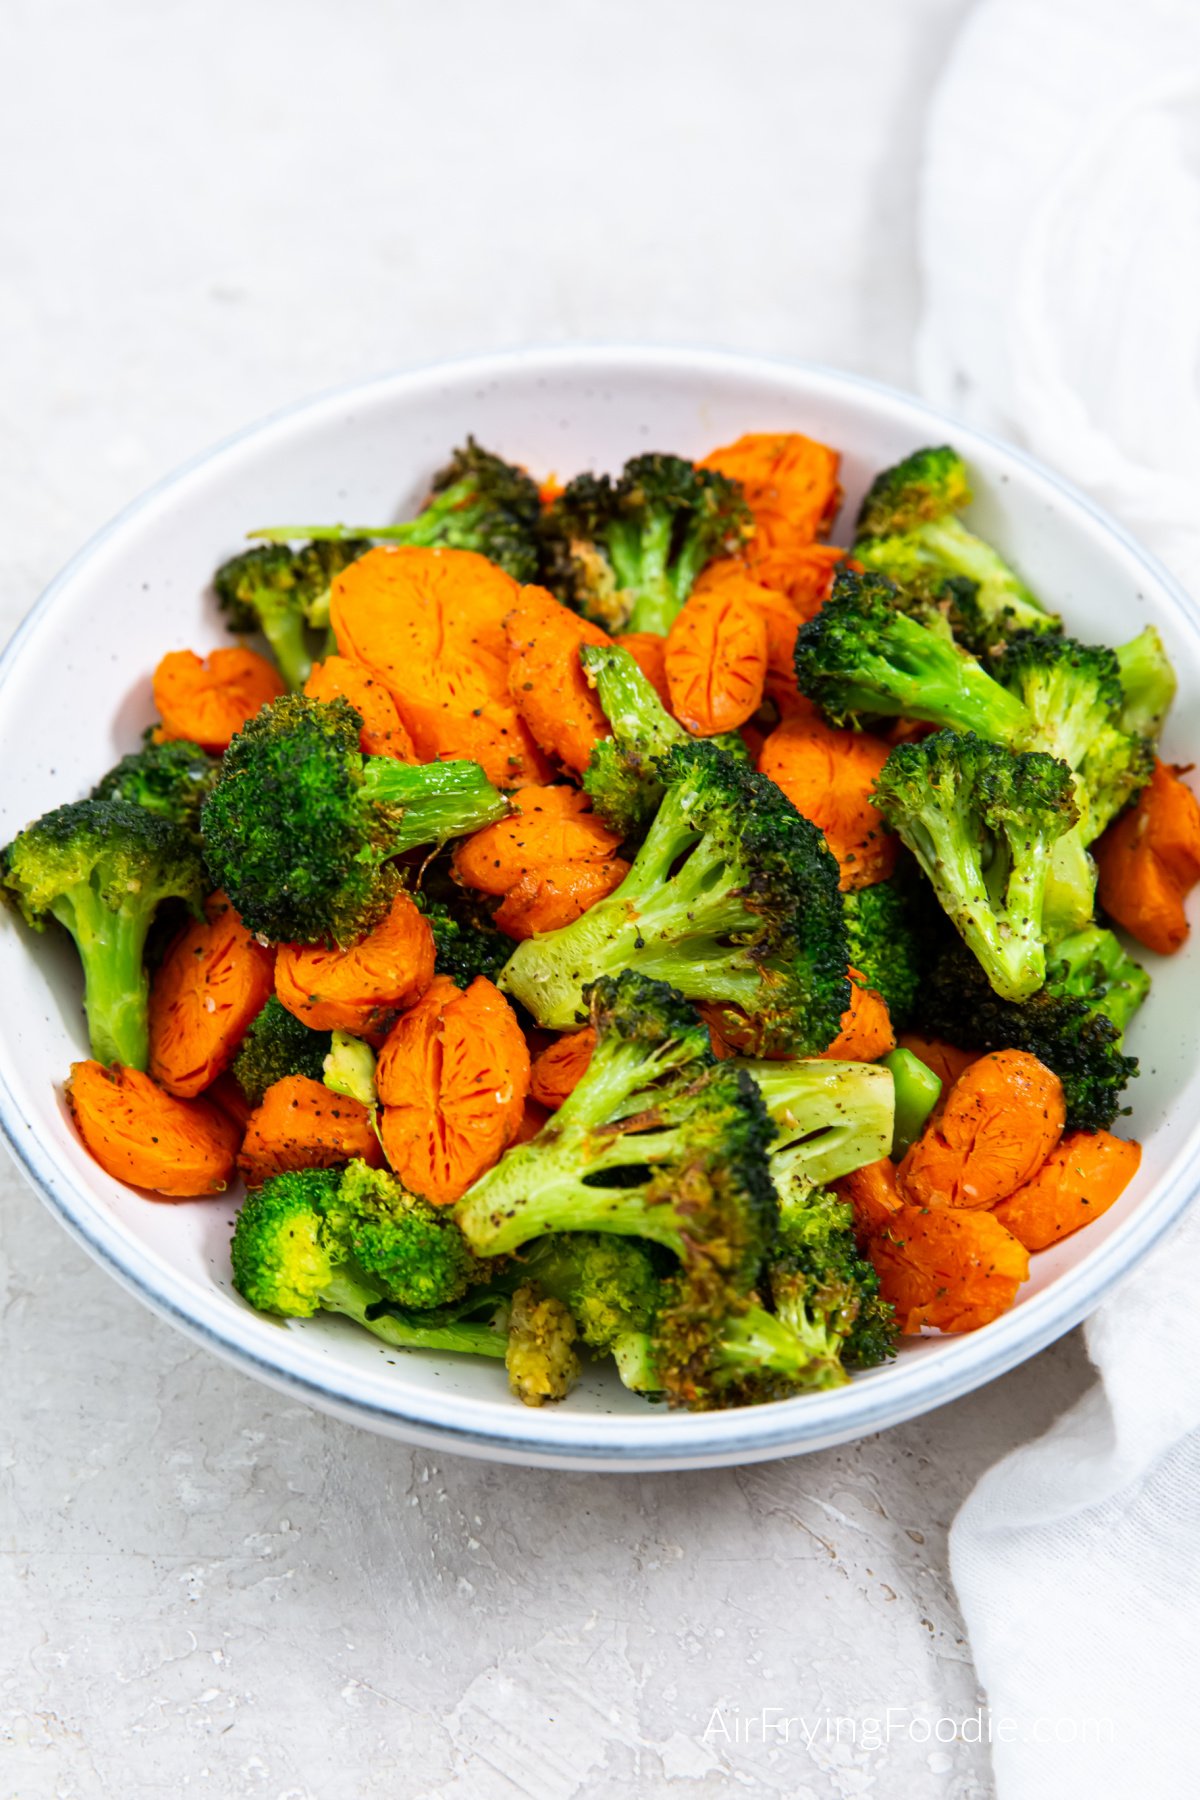 Air fried broccoli and carrots in a bowl, ready to eat.